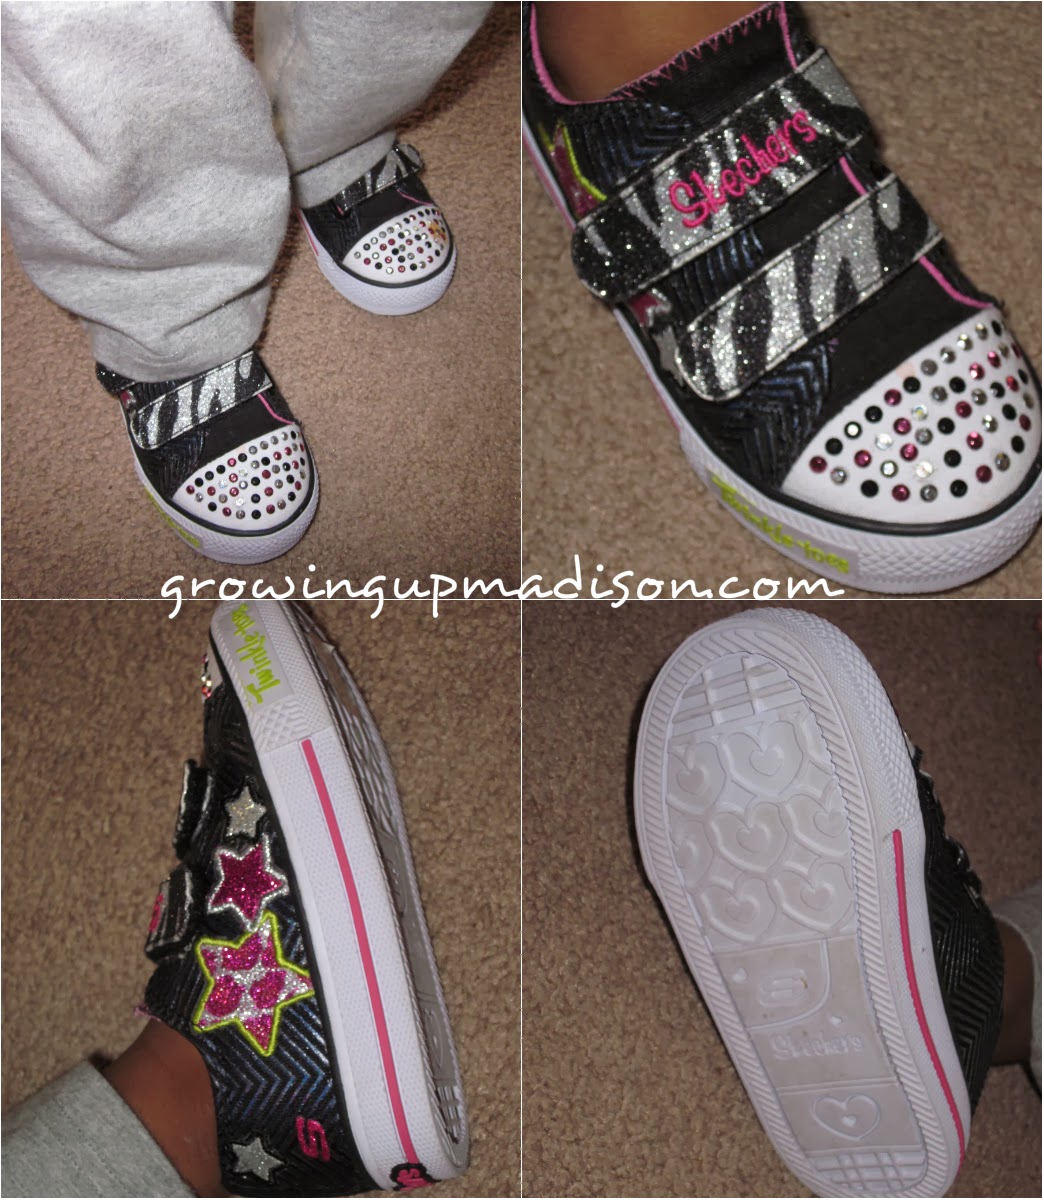 Perseus bypass Støt Light Up With Twinkle Toes by Skechers #Review - AnnMarie John